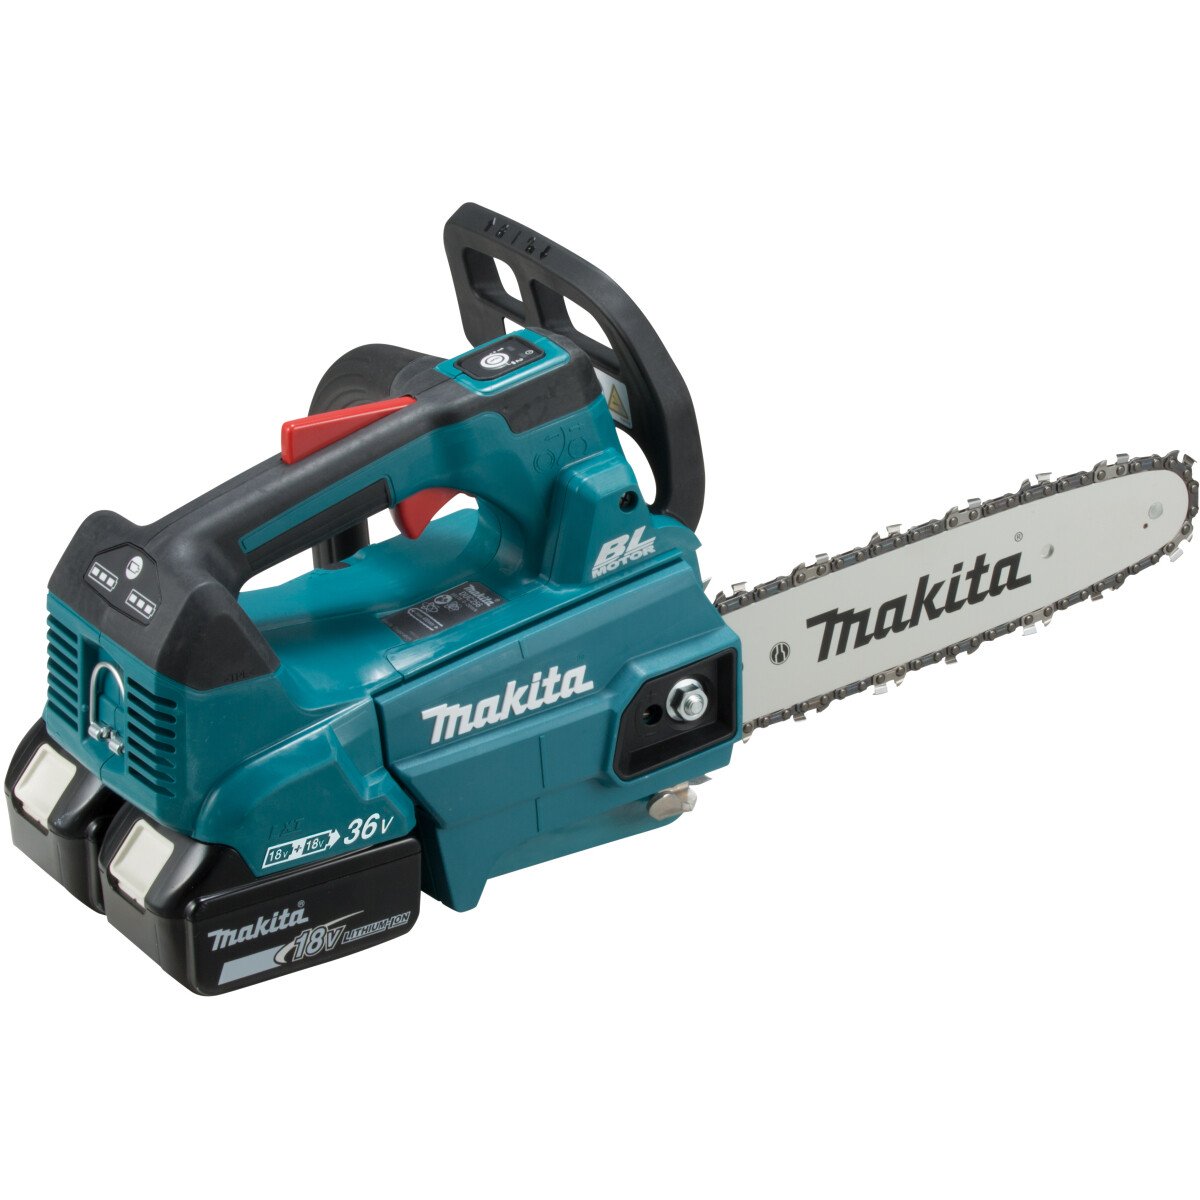 Makita DUC256PG2 Twin 18V Top Handle Chainsaw 25cm with 2 x 6.0Ah Batteries